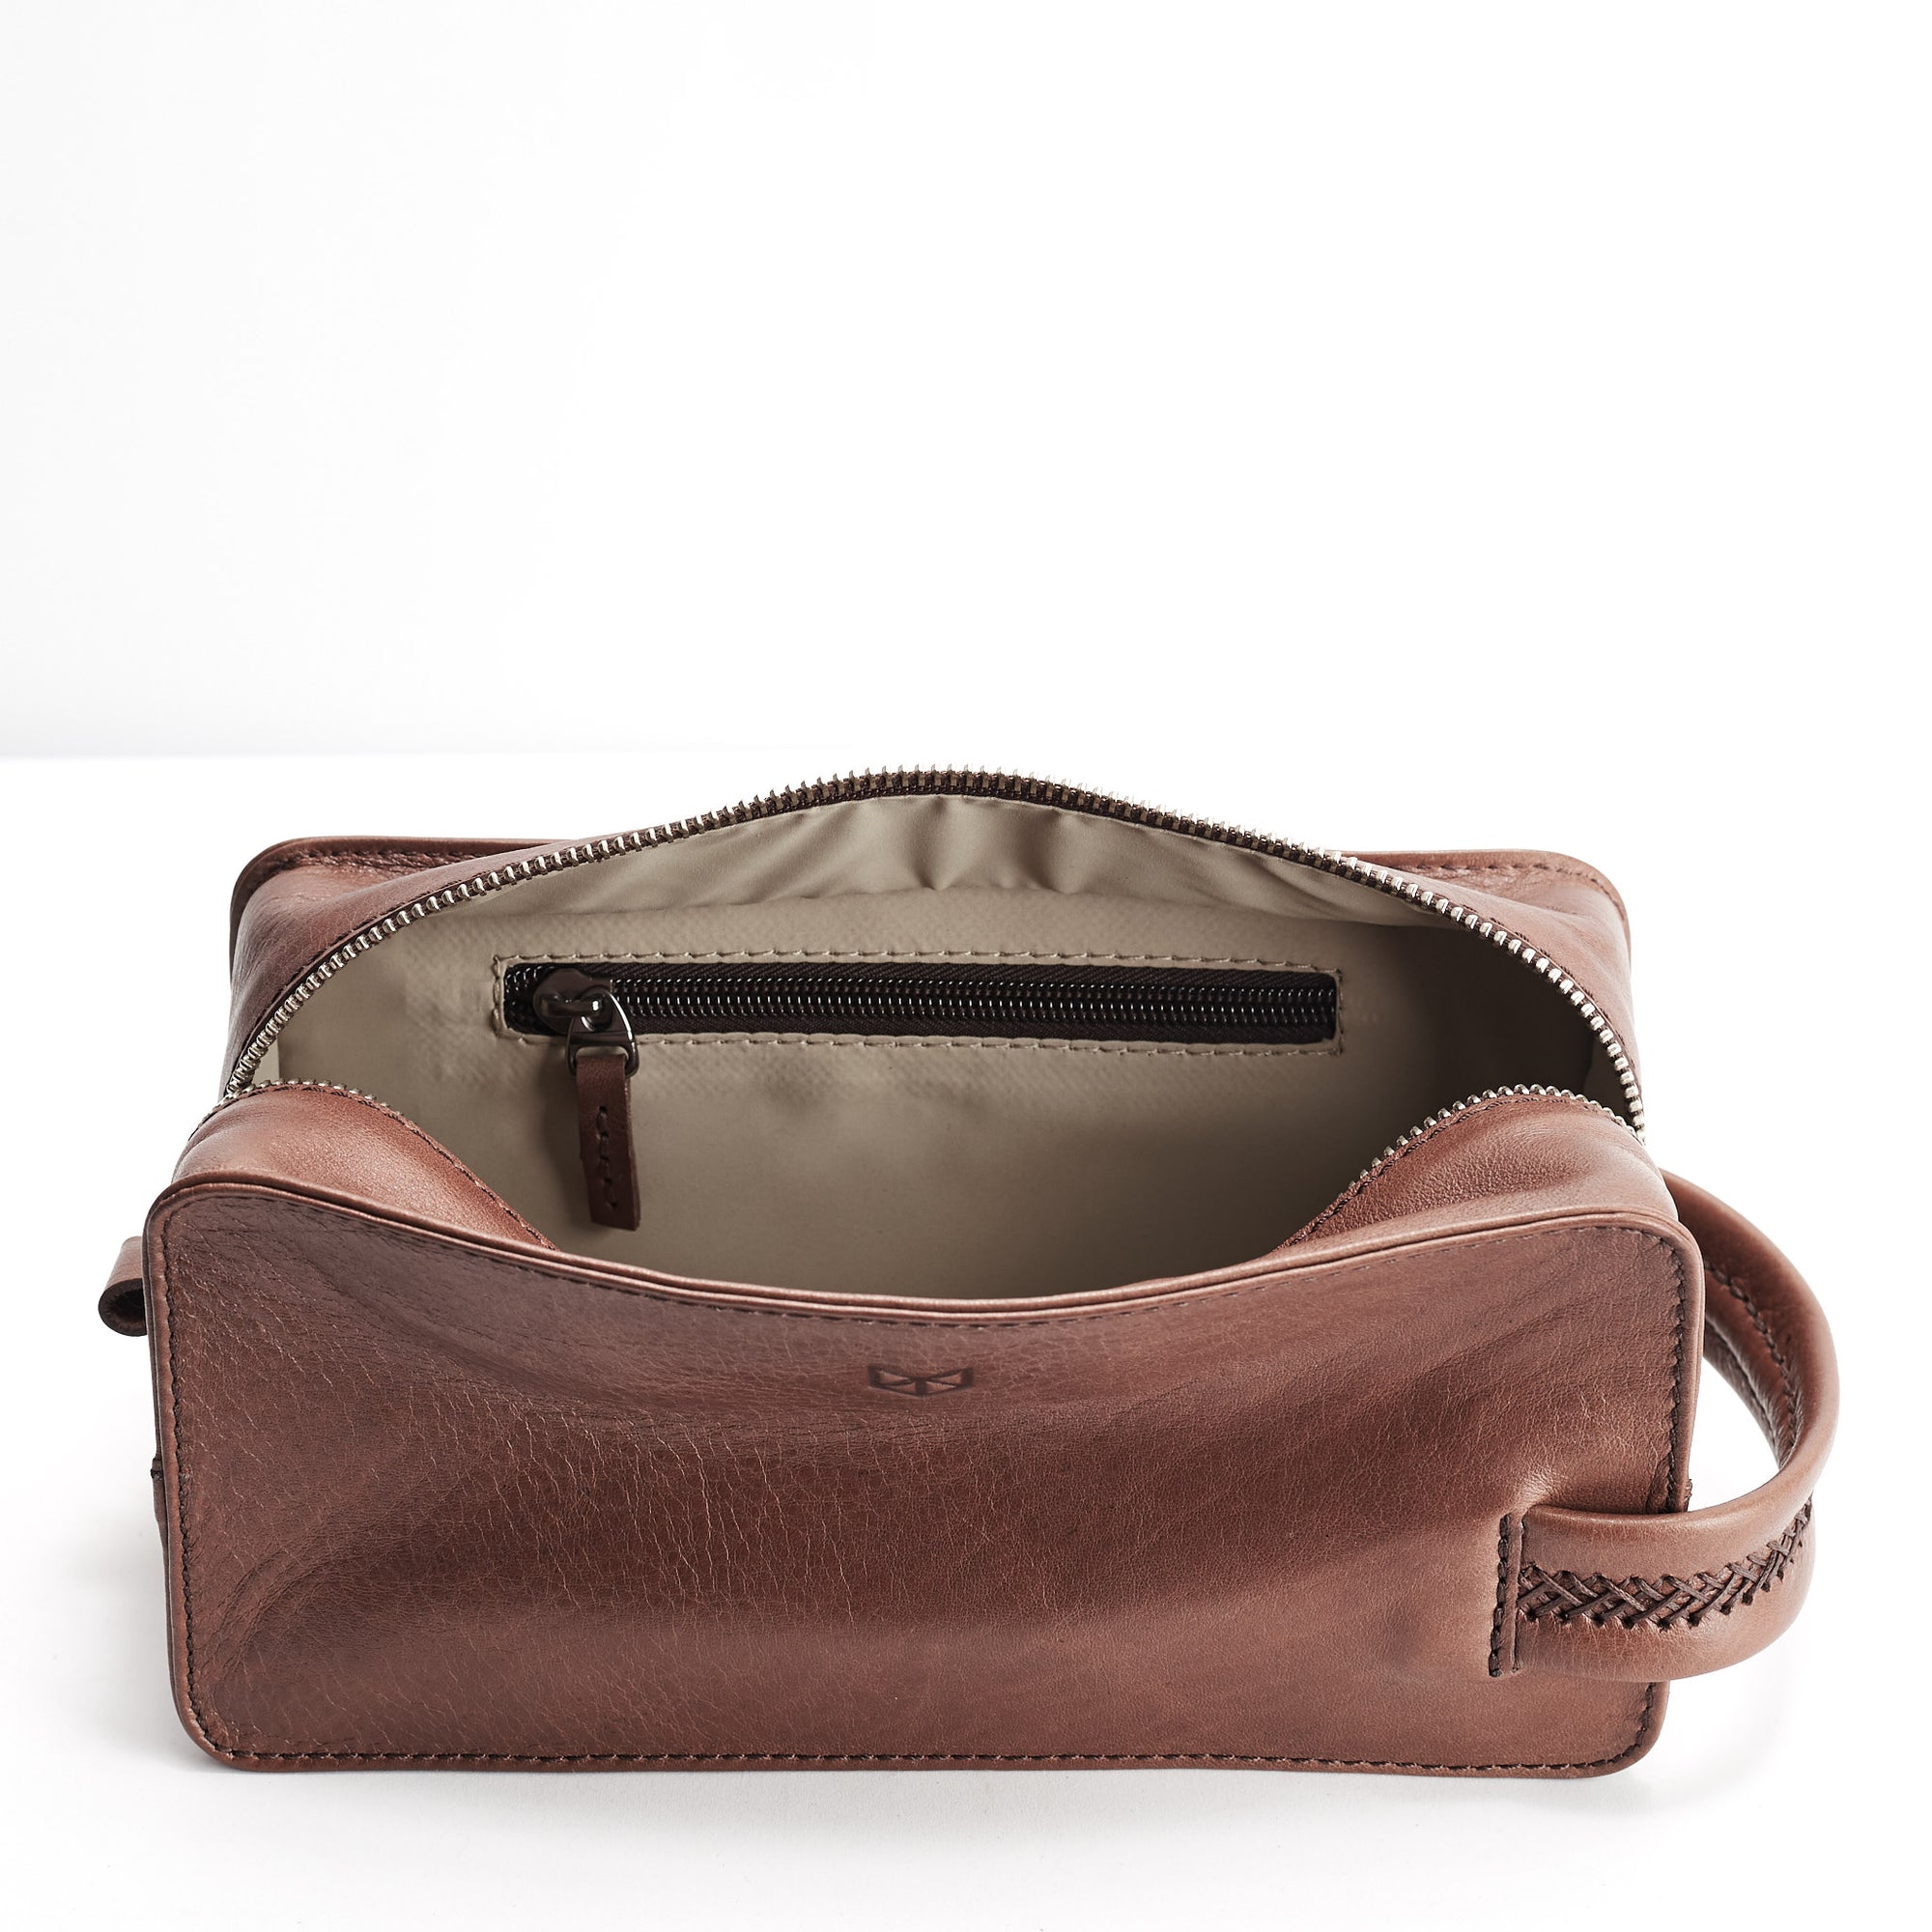 Leather toiletry bag with interior pocket for small essentials. Brown leather shaving bag for mens gifts